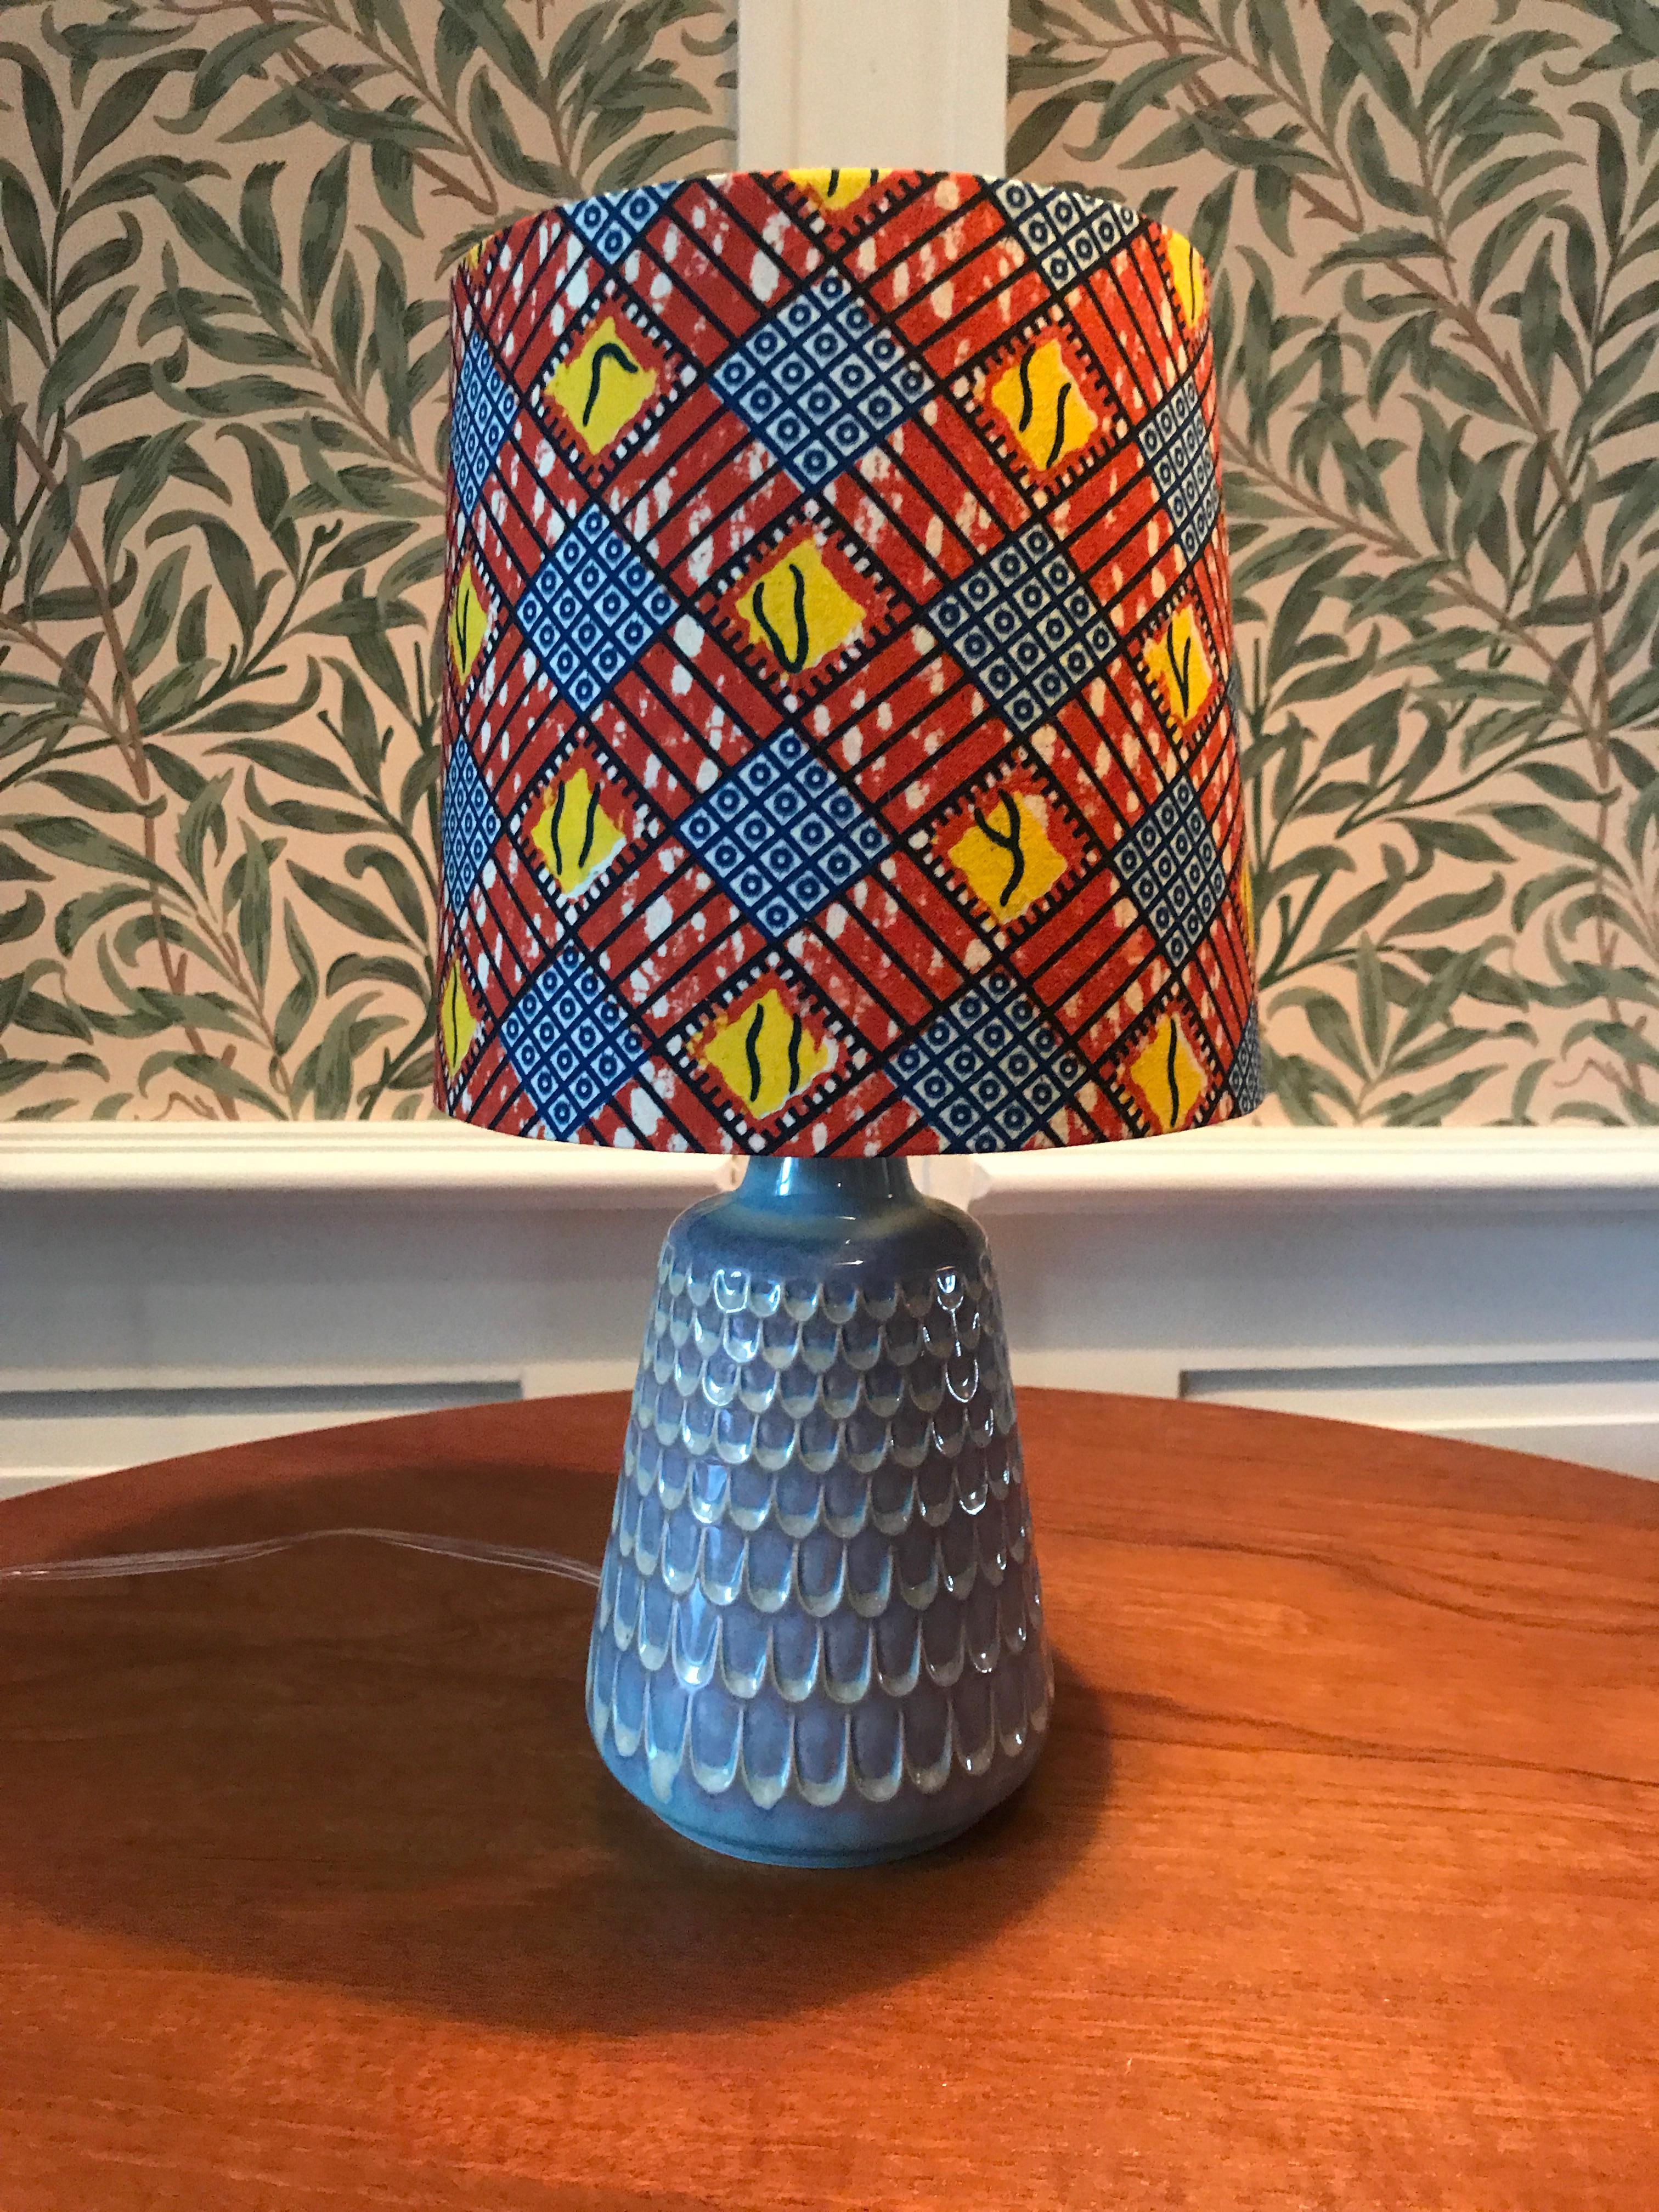 Lovely ceramic table lamp in grey-green glaze. New lampshade in beautifully patterned African textile.